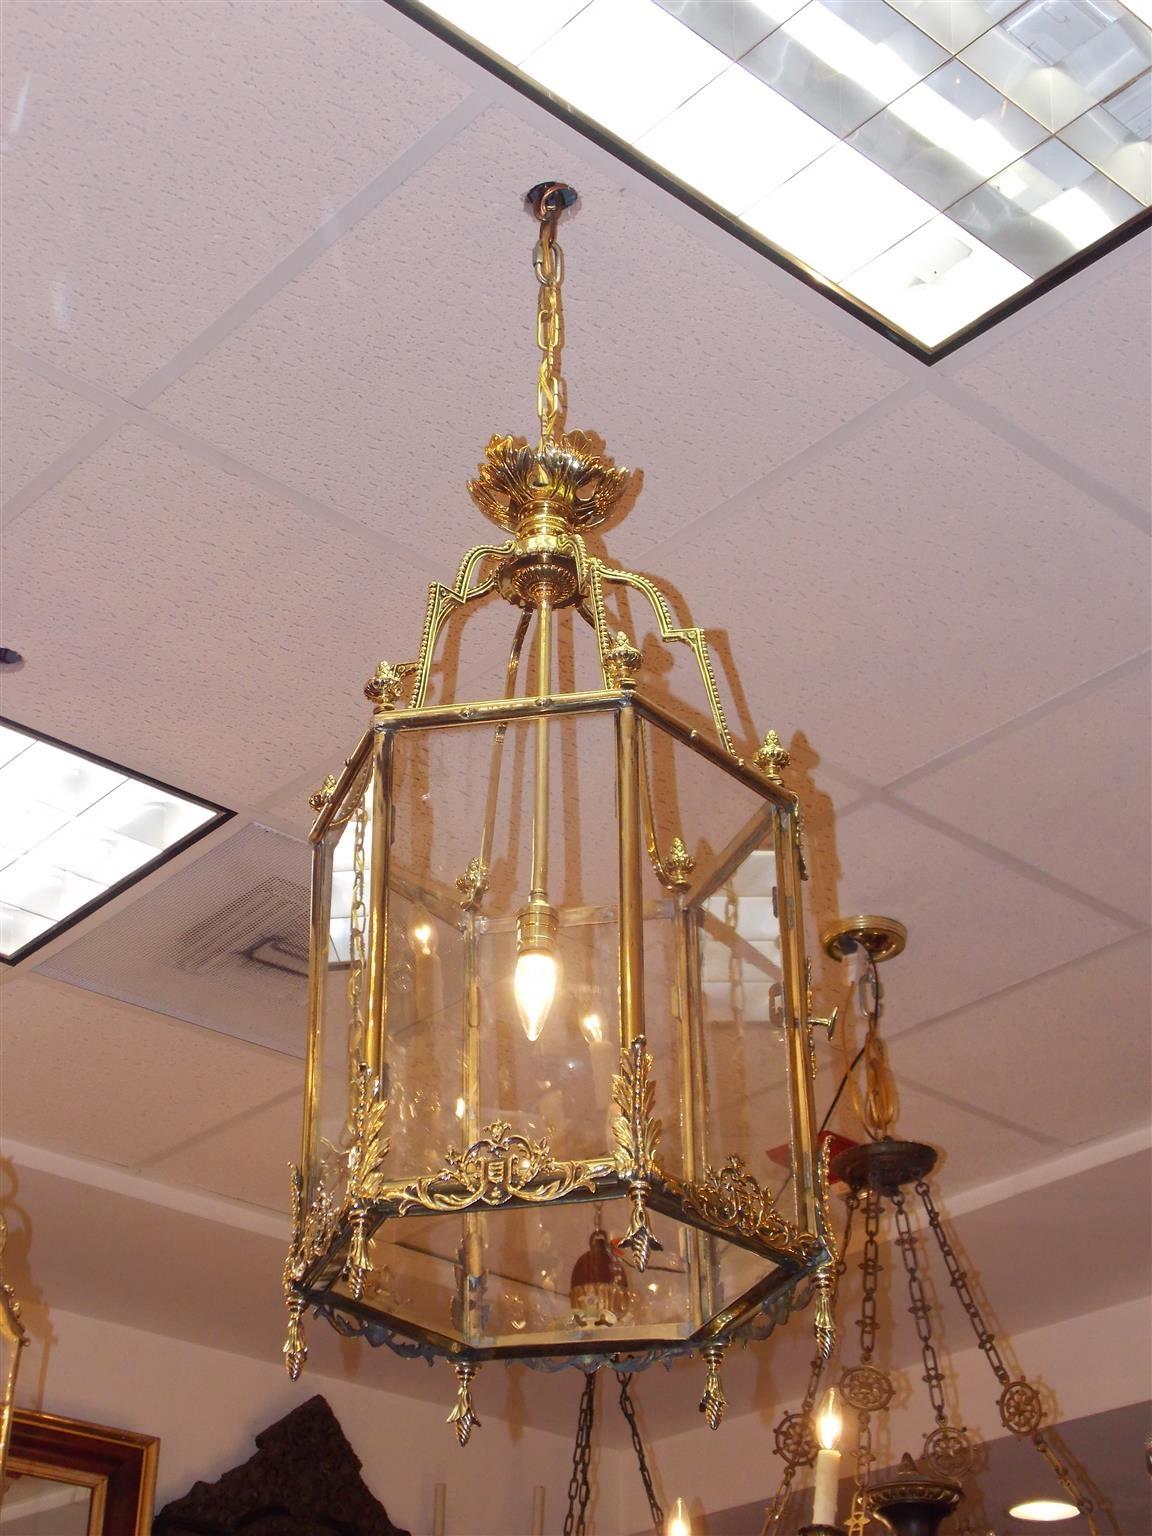 English brass hanging hall lantern with a floral canopy,  scrolled step back beaded arms adorned with bulbous finials, six floral decorative glass panes with a hinged locking door, single interior light, and each corner resting on decorative